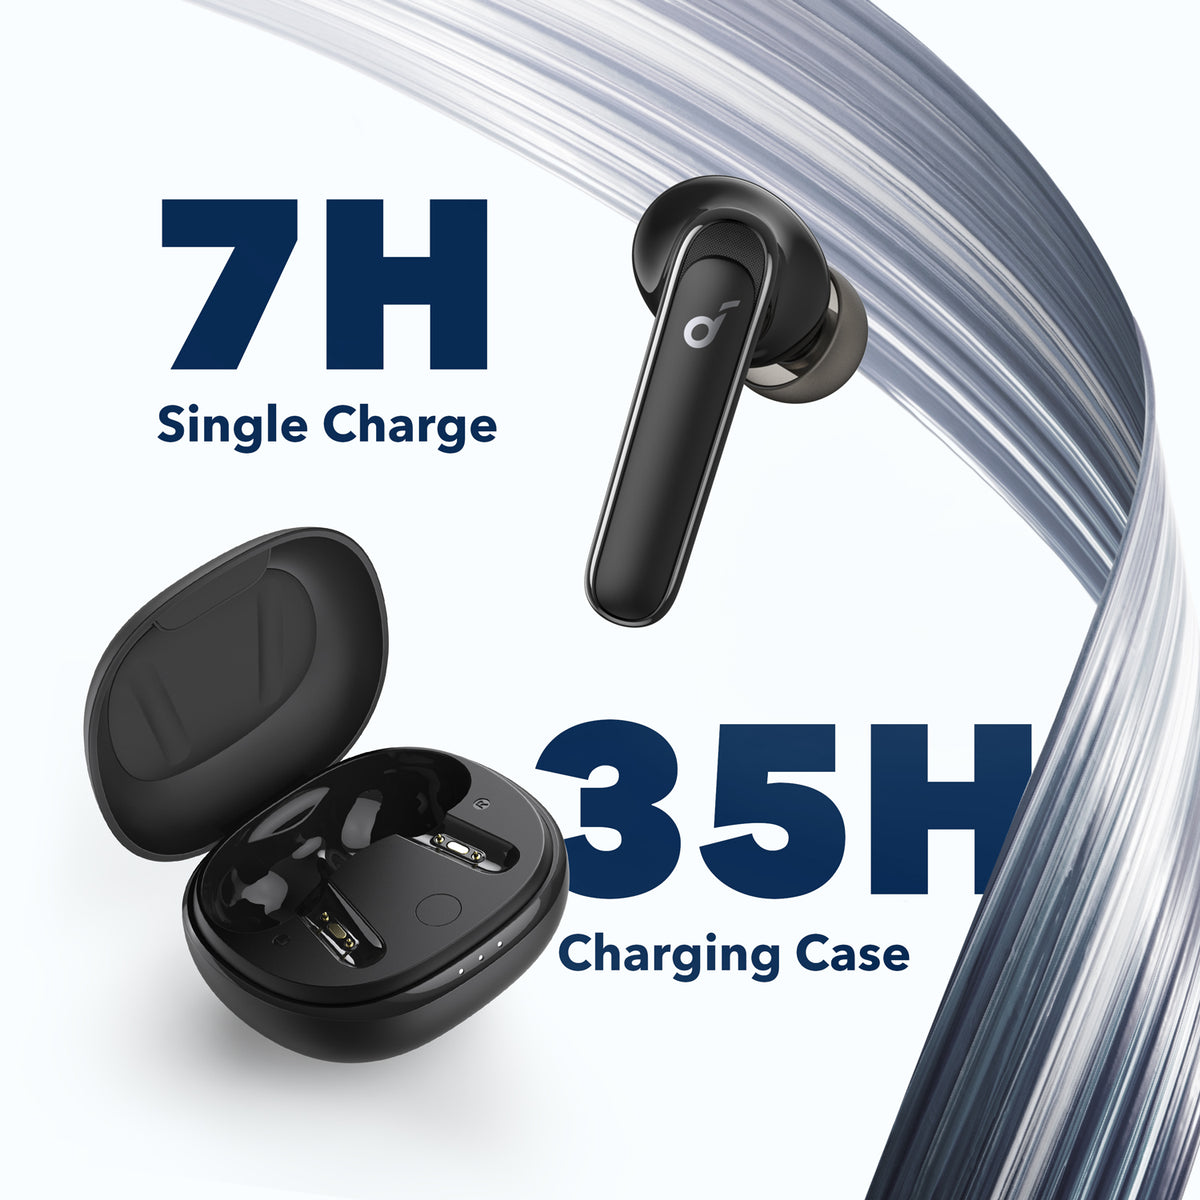 P3 | Noise Cancelling Earbuds mit Bass